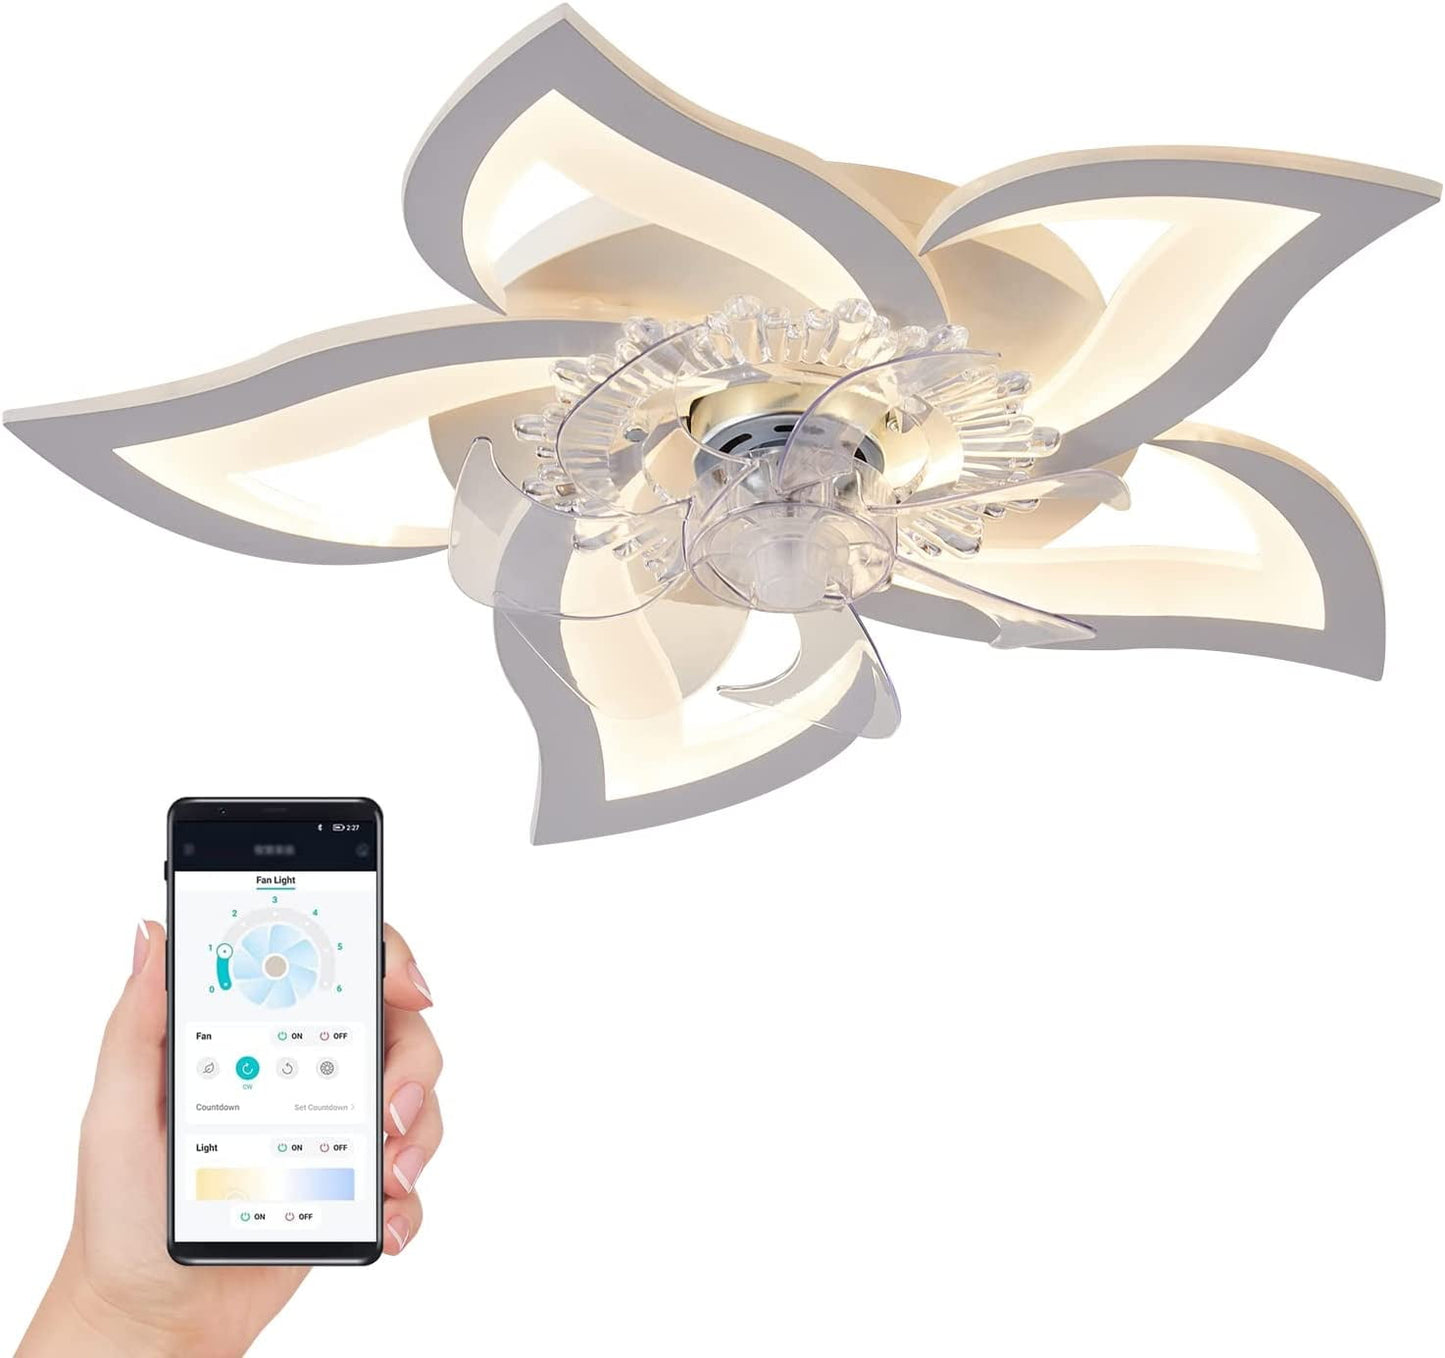 27In Low Profile Ceiling Fans with Lights,White Modern Dimmable Flower Shape,6 Speeds 3 Light Color Flush Mount Ceiling Fan with Remote Control/App Control for Bedroom Children's Room Dining Room